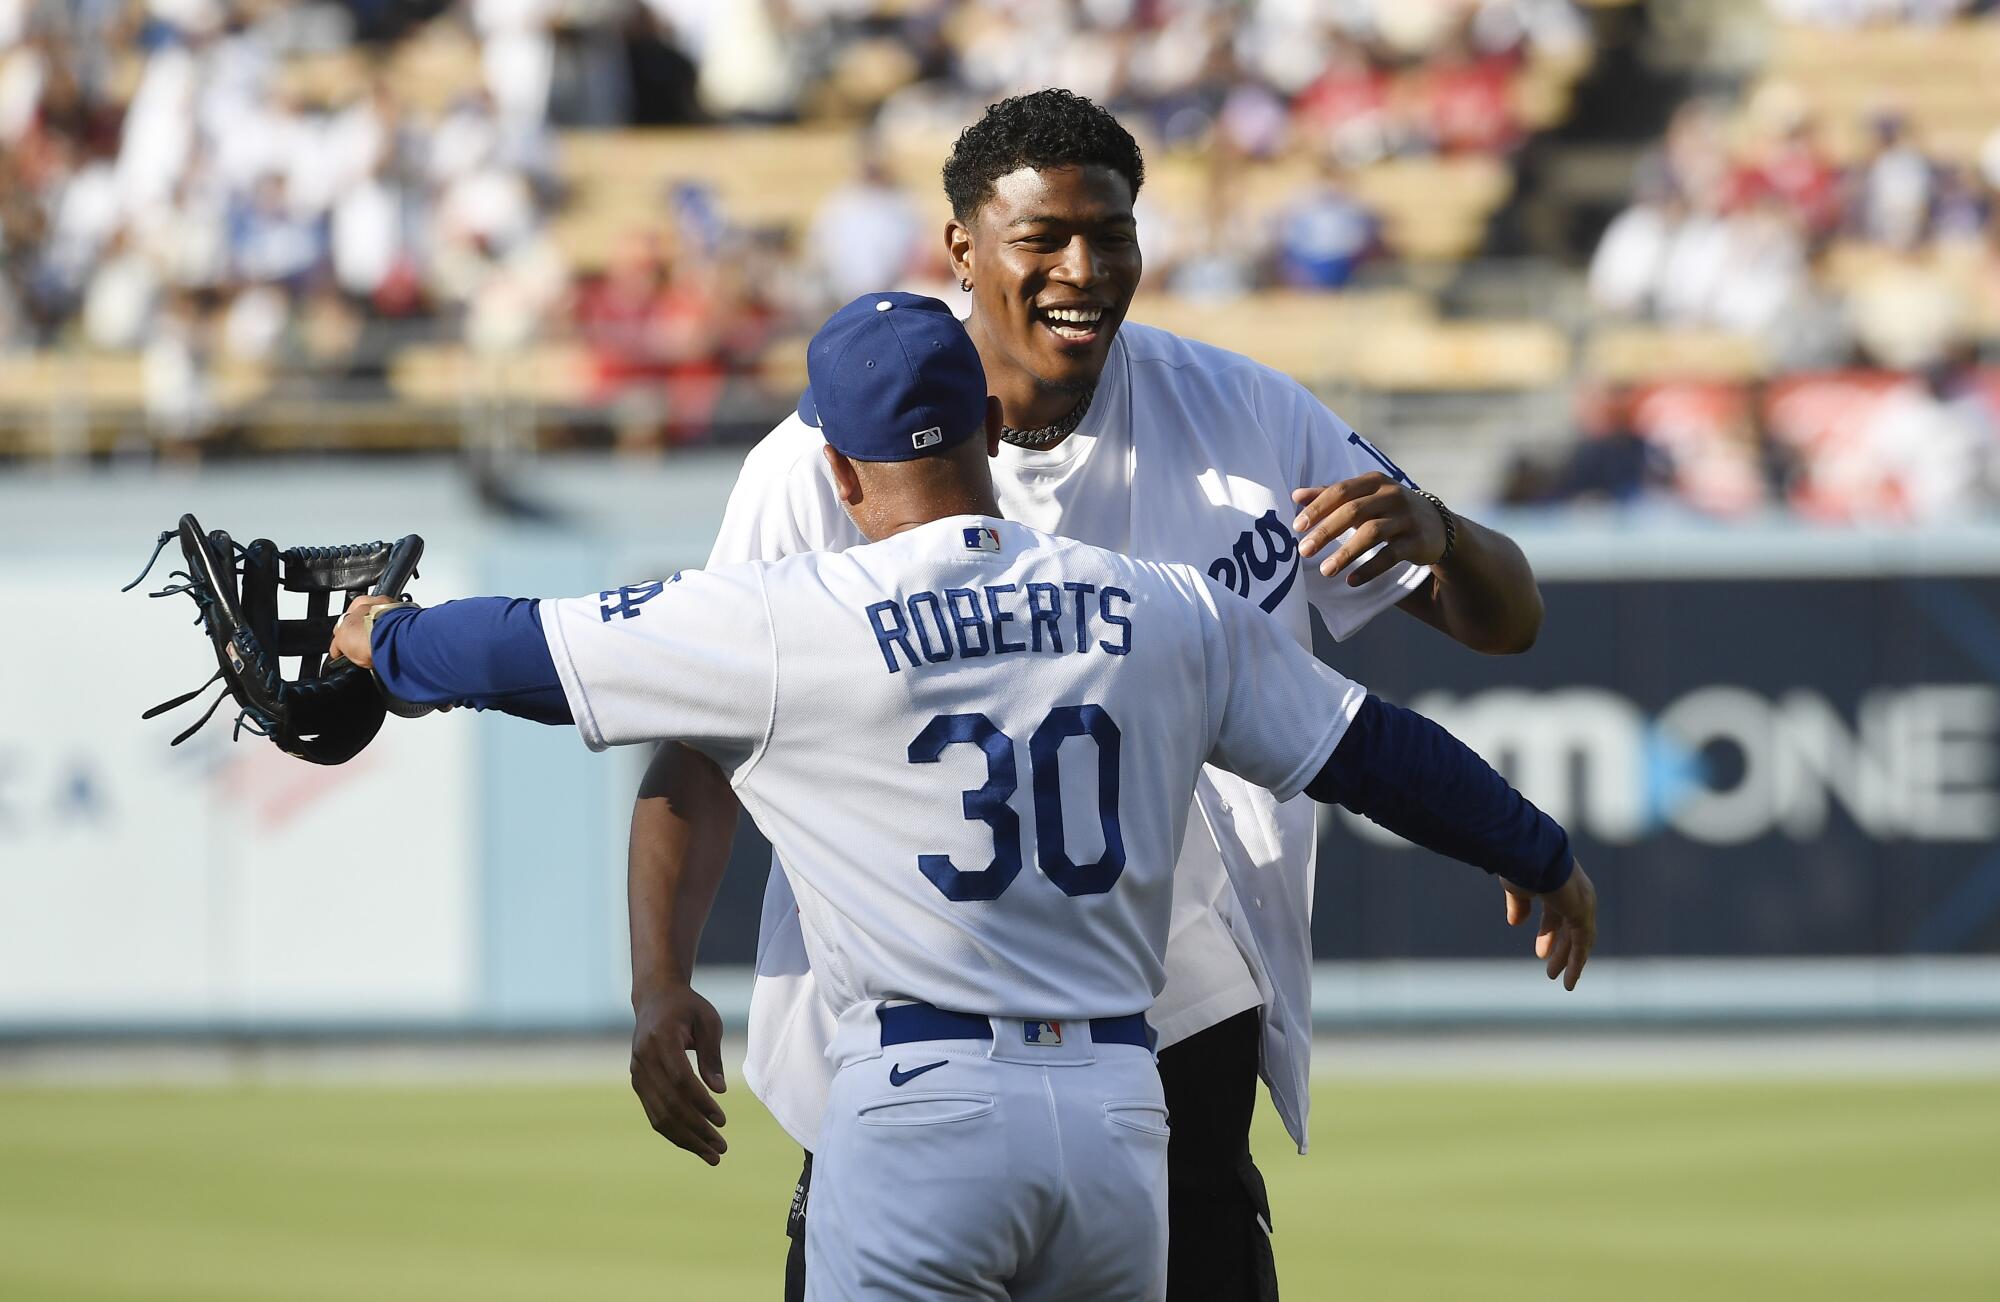 Rui Hachimura gets a hug from Dodgers manager Dave Roberts after throwing the ceremonial first pitch.